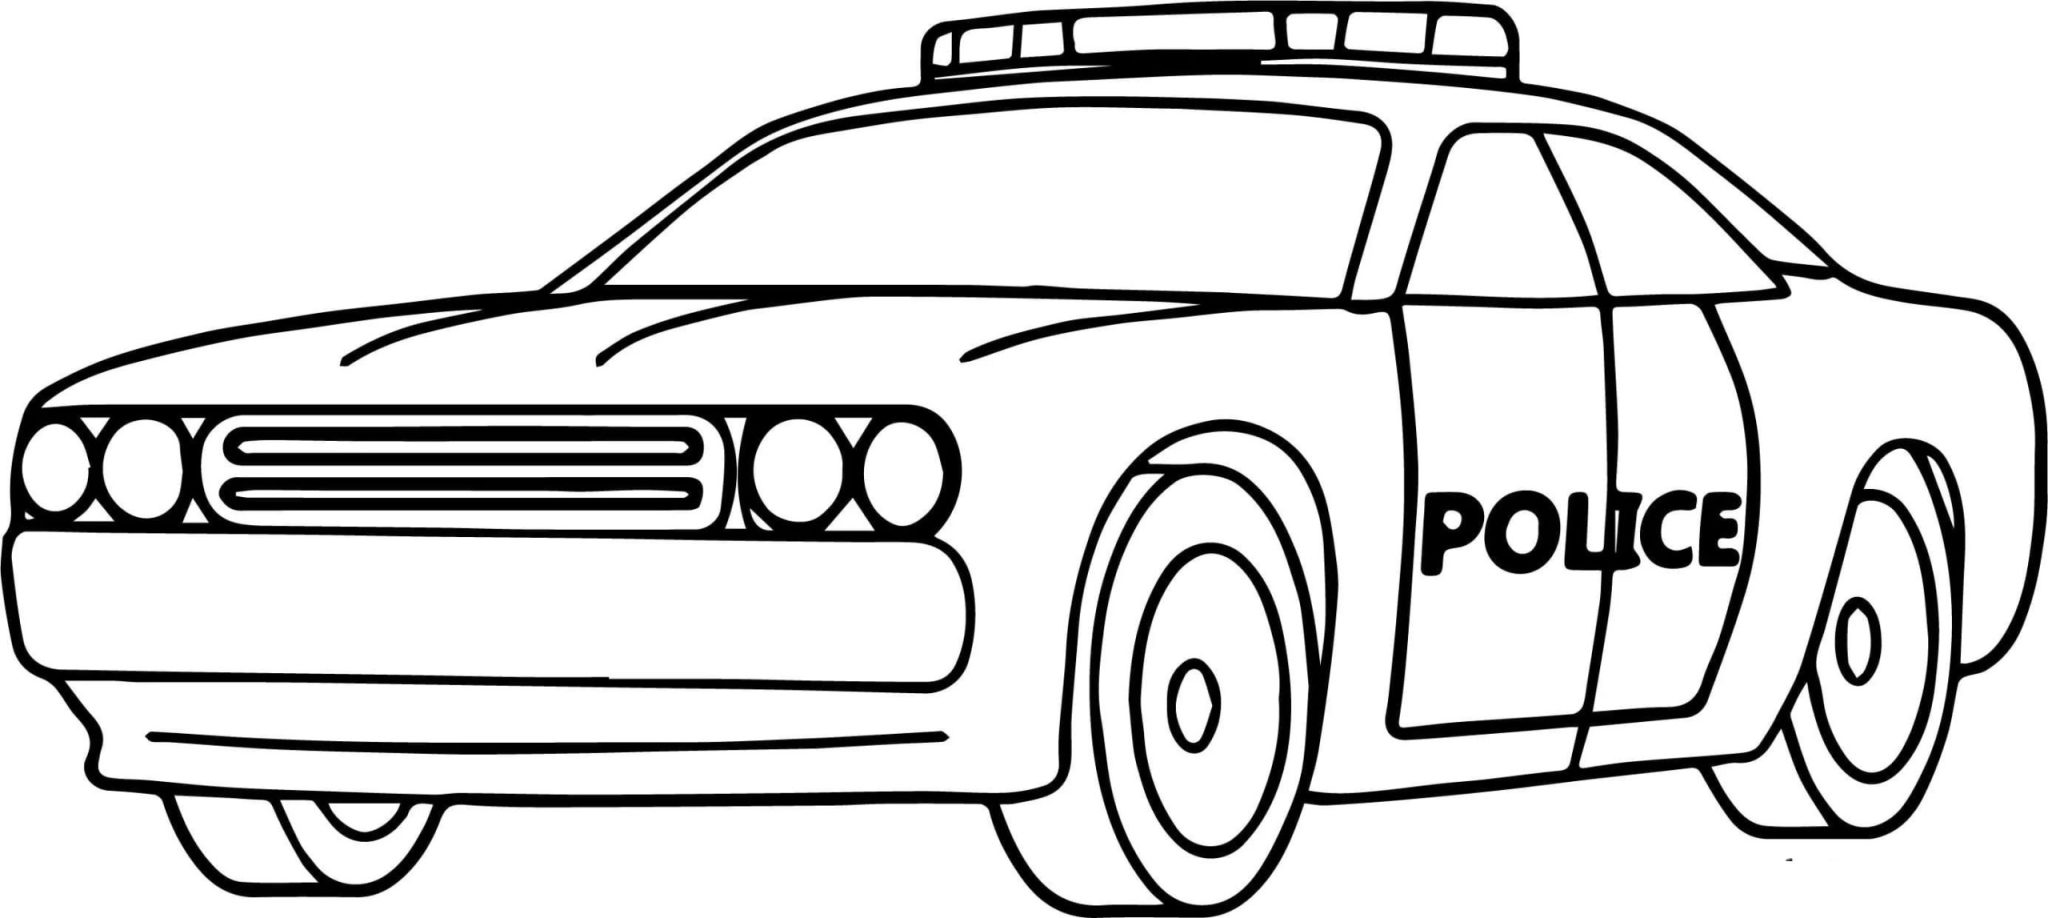 Get Your Kids Excited with Police Car Coloring Pages | GBcoloring